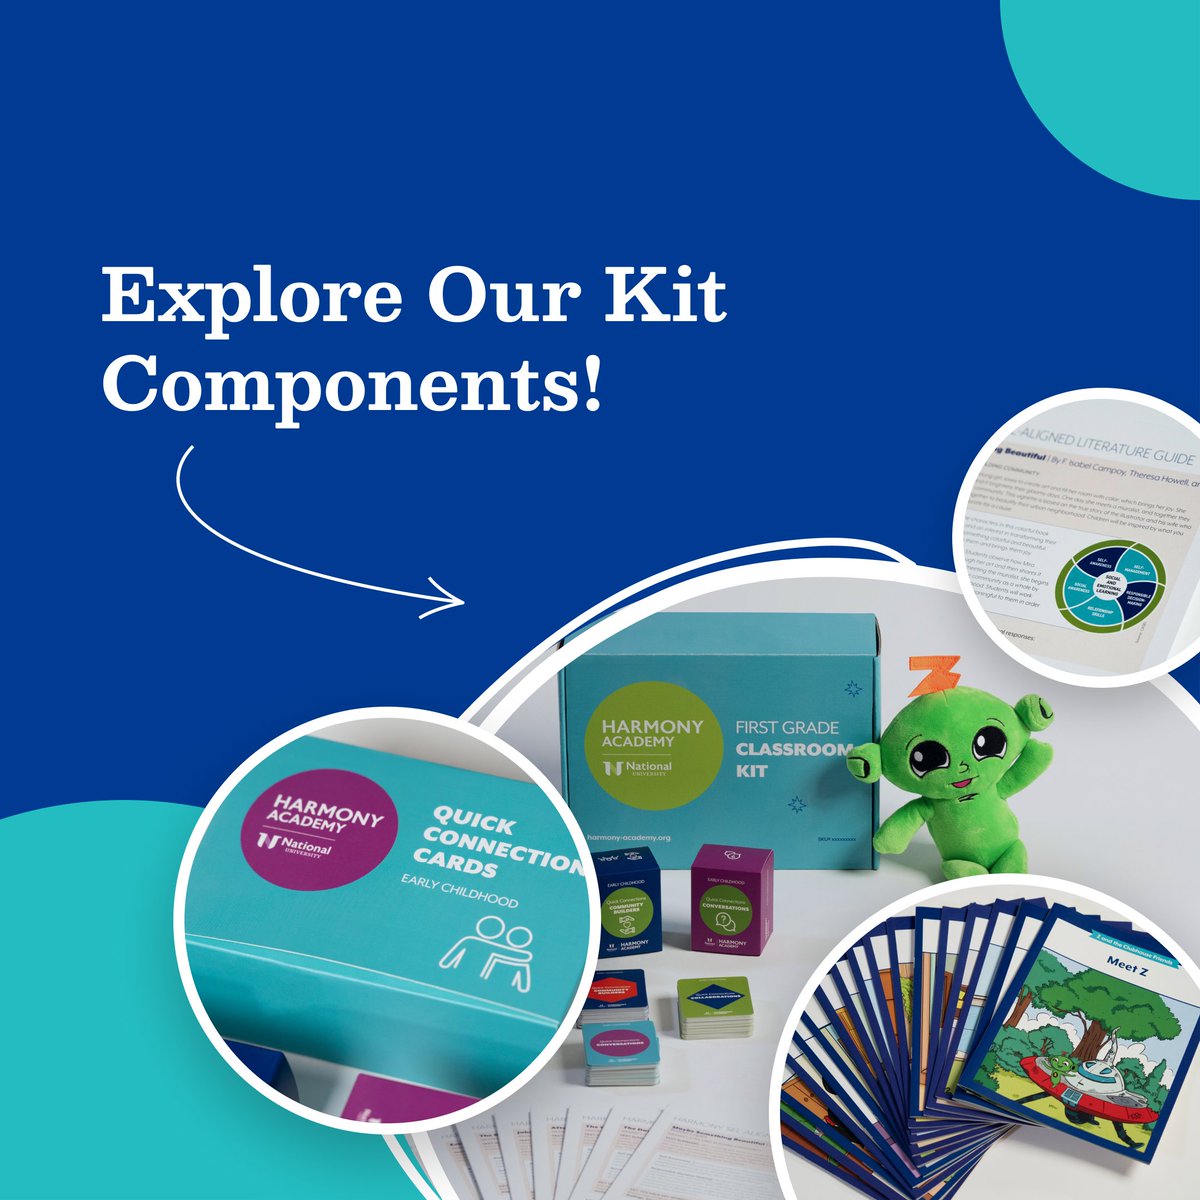 📚✨ Elevate your teaching experience with the new Harmony Classroom Kits designed to transform the way students engage with the Harmony Curriculum! Dive into hands-on engagement. Learn more about our new kits today! harmony-academy.org/harmony-classr… #HarmonyKit #ClassroomKit